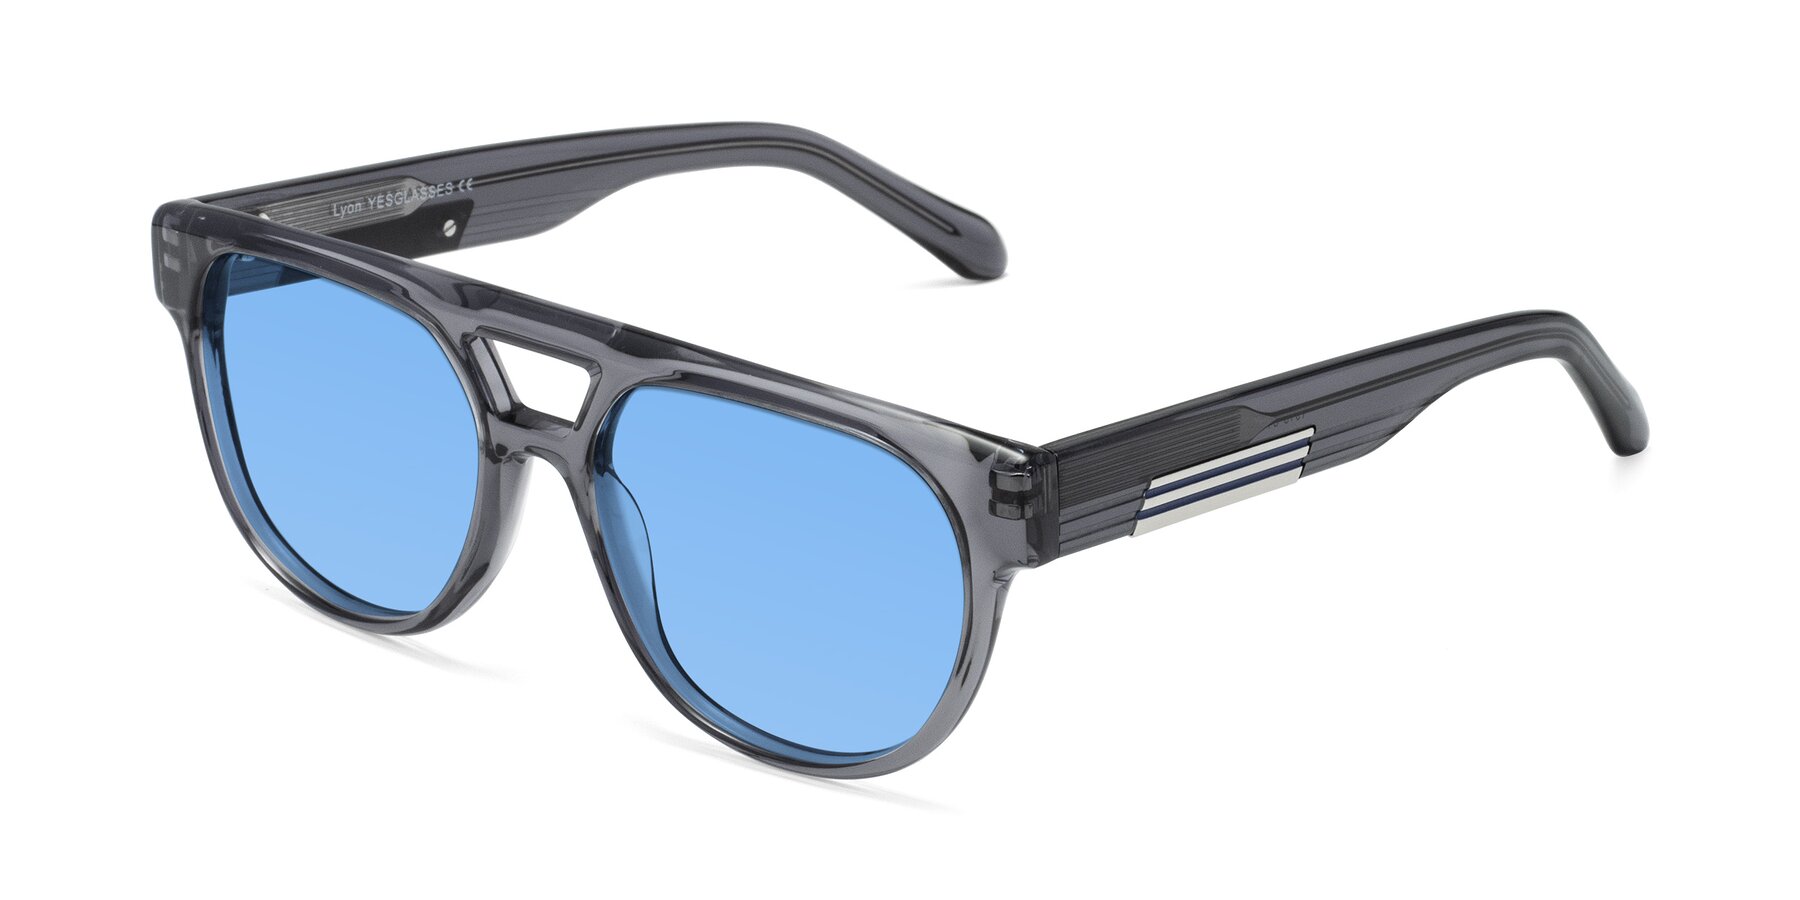 Angle of Lyon in Dim Gray with Medium Blue Tinted Lenses